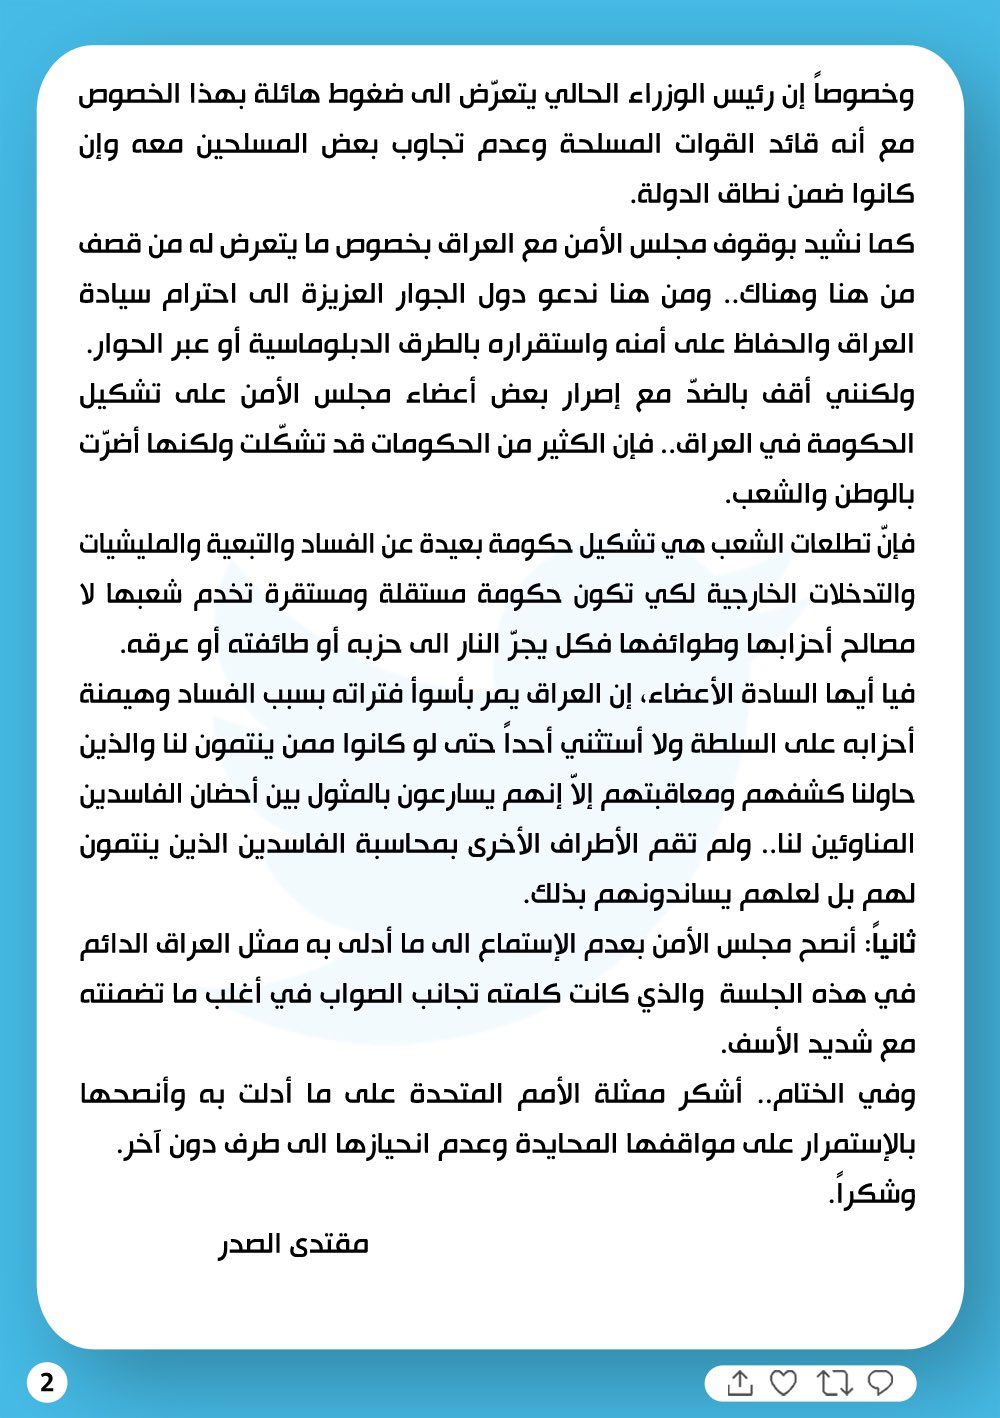 Al-Sadr thanks Plasschaert, warns the Security Council against Bahr al-Ulum, and agrees to dialogue on one condition  